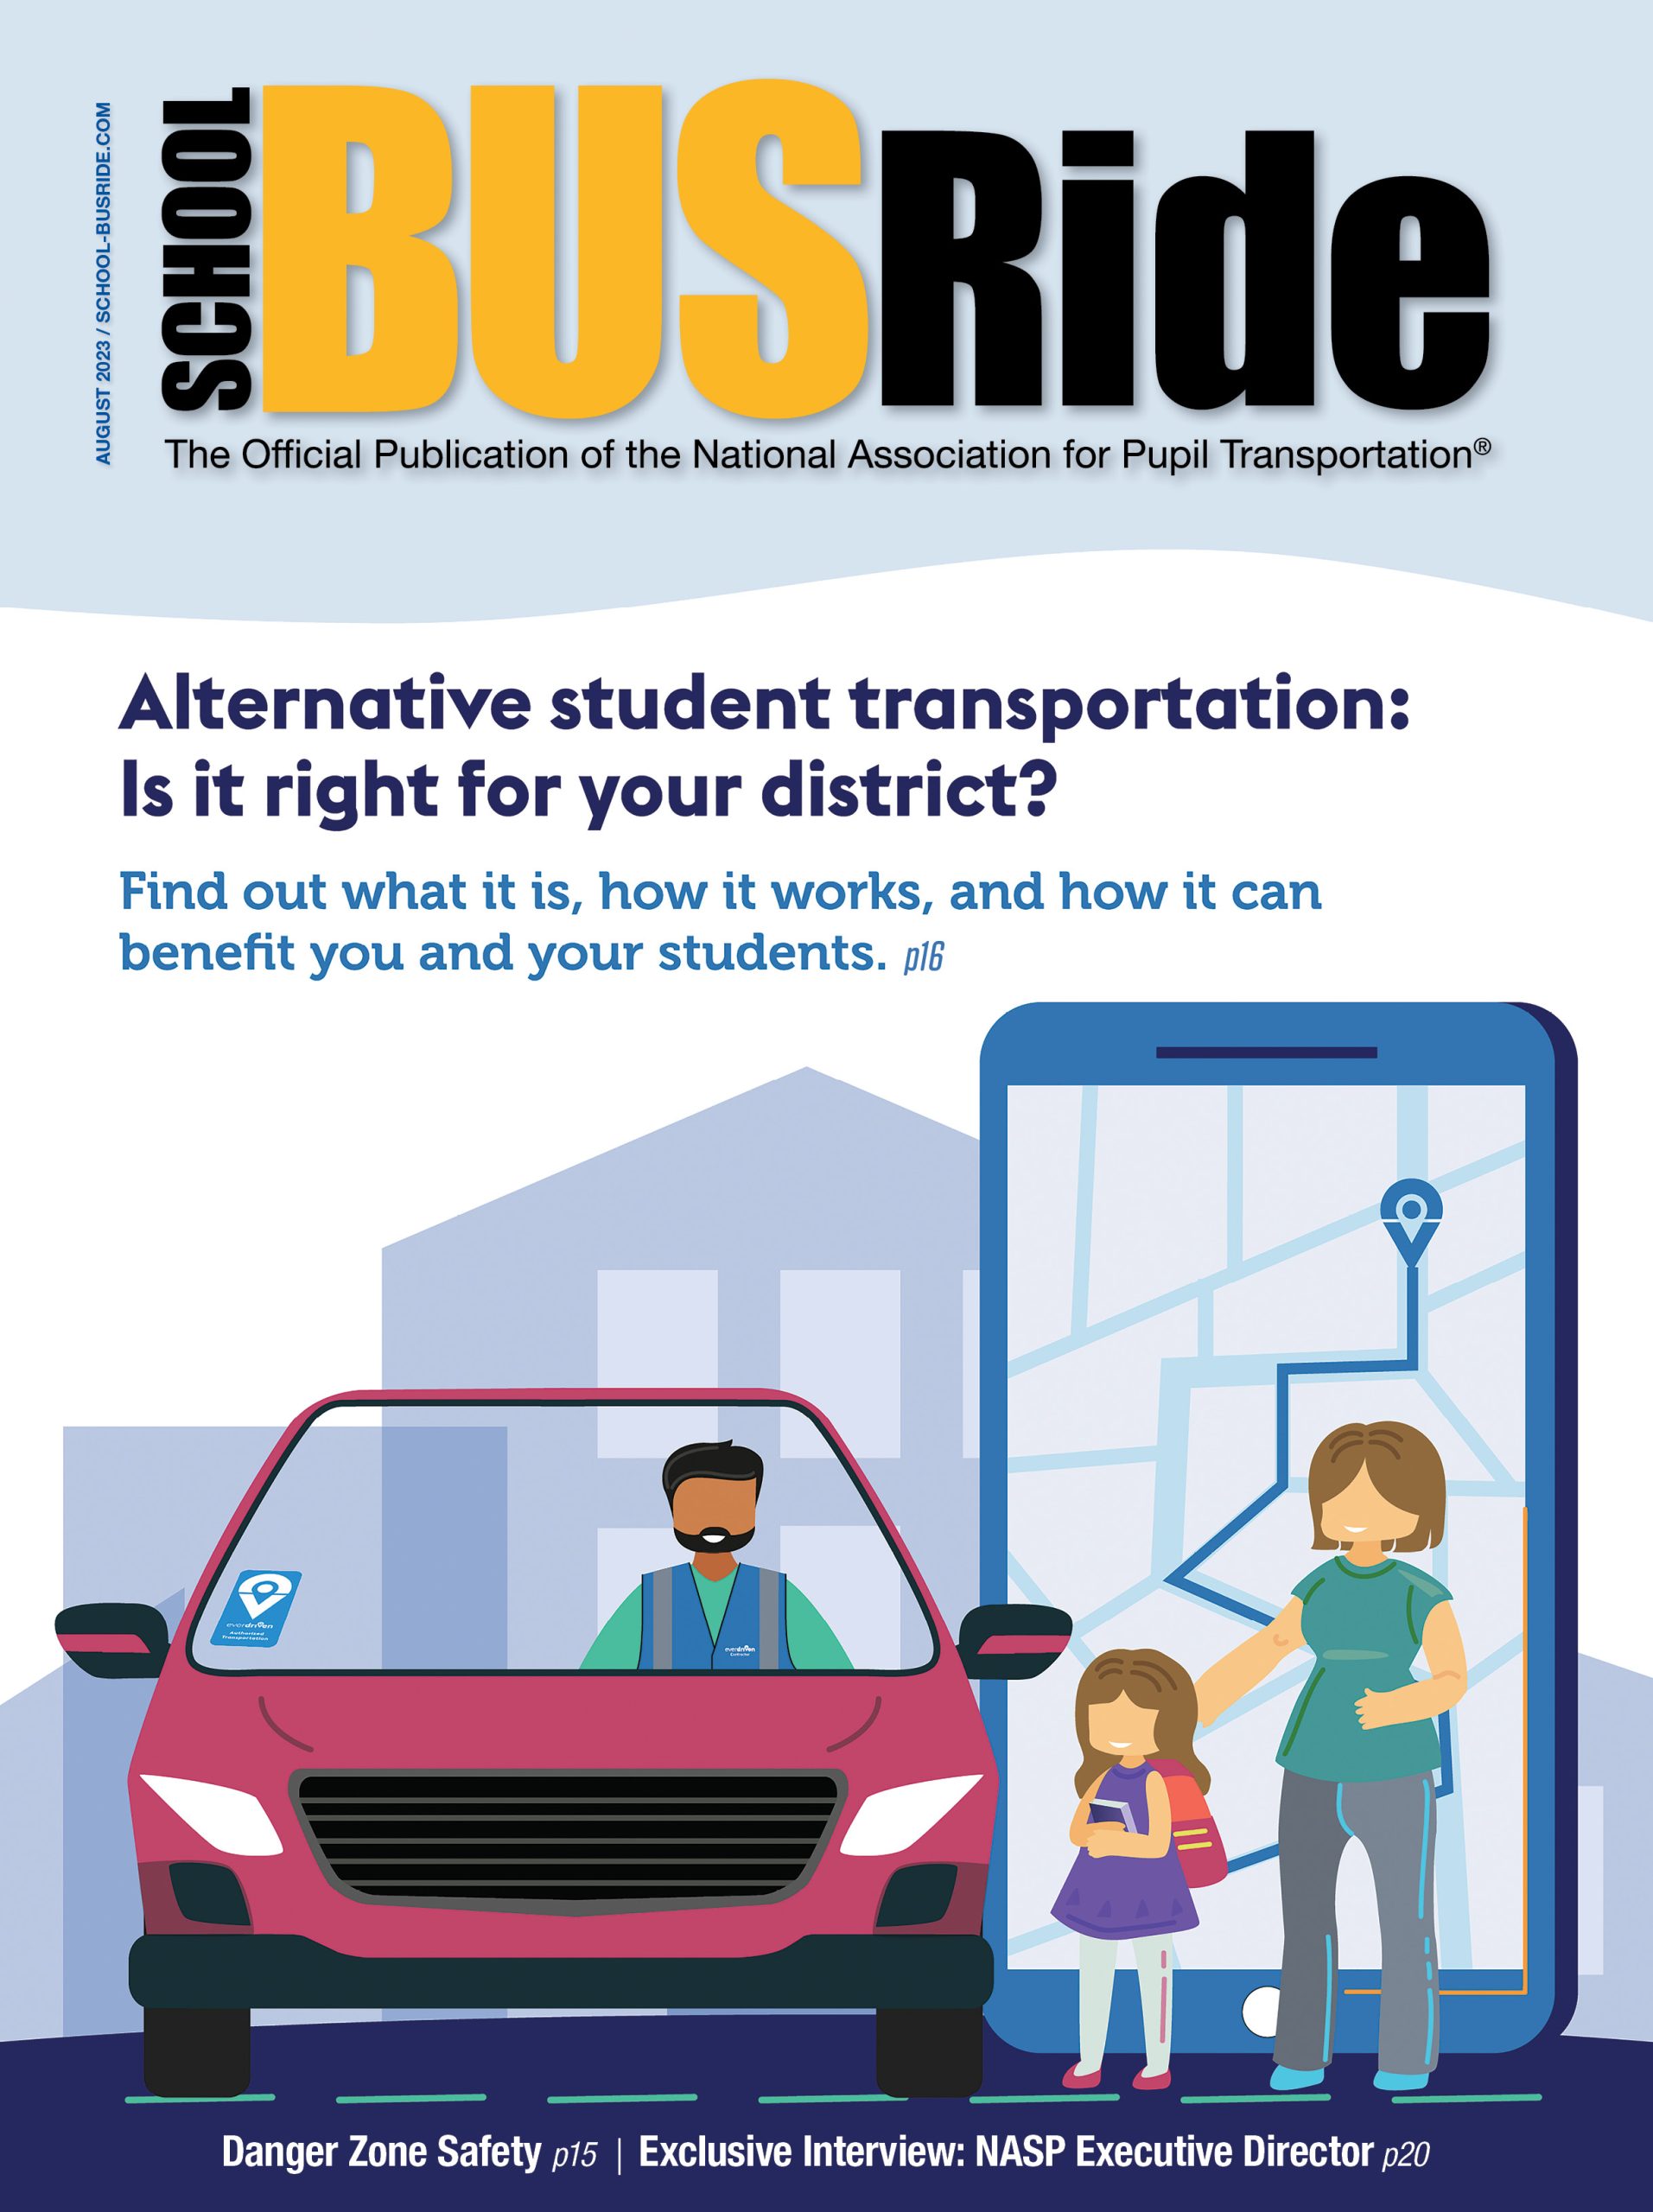 Is Alternative School Transportation Right for Your District?